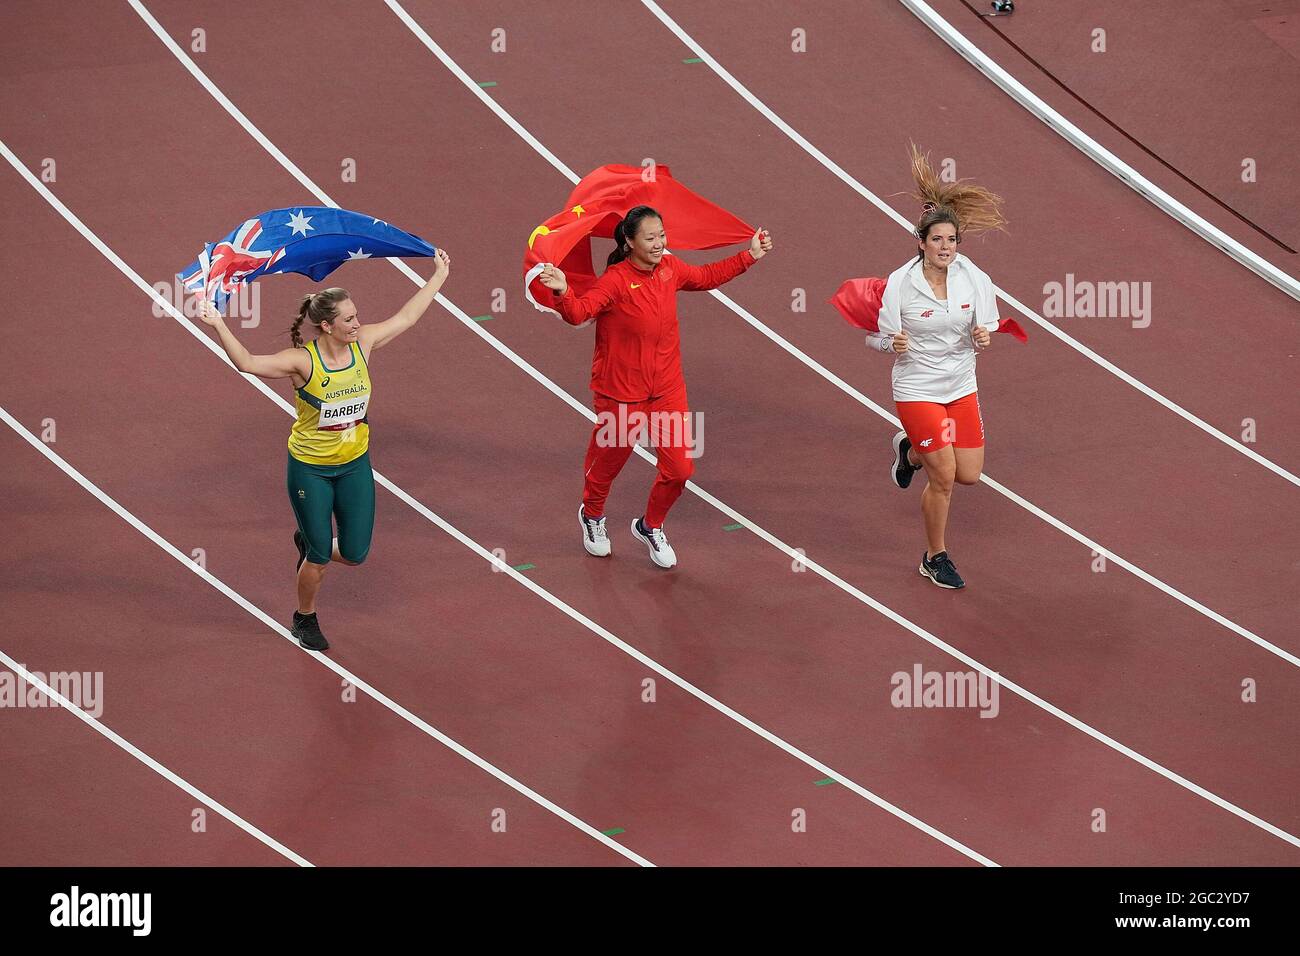 Tokyo, Japan. 6th Aug, 2021. (From L to R) Kelsey-Lee Barber of Australia, Liu Shiying of China and Maria Andrejczyk of Poland celebrate after the women's javelin throw final at Tokyo 2020 Olympic Games, in Tokyo, Japan, Aug. 6, 2021. Credit: Lui Siu Wai/Xinhua/Alamy Live News Stock Photo